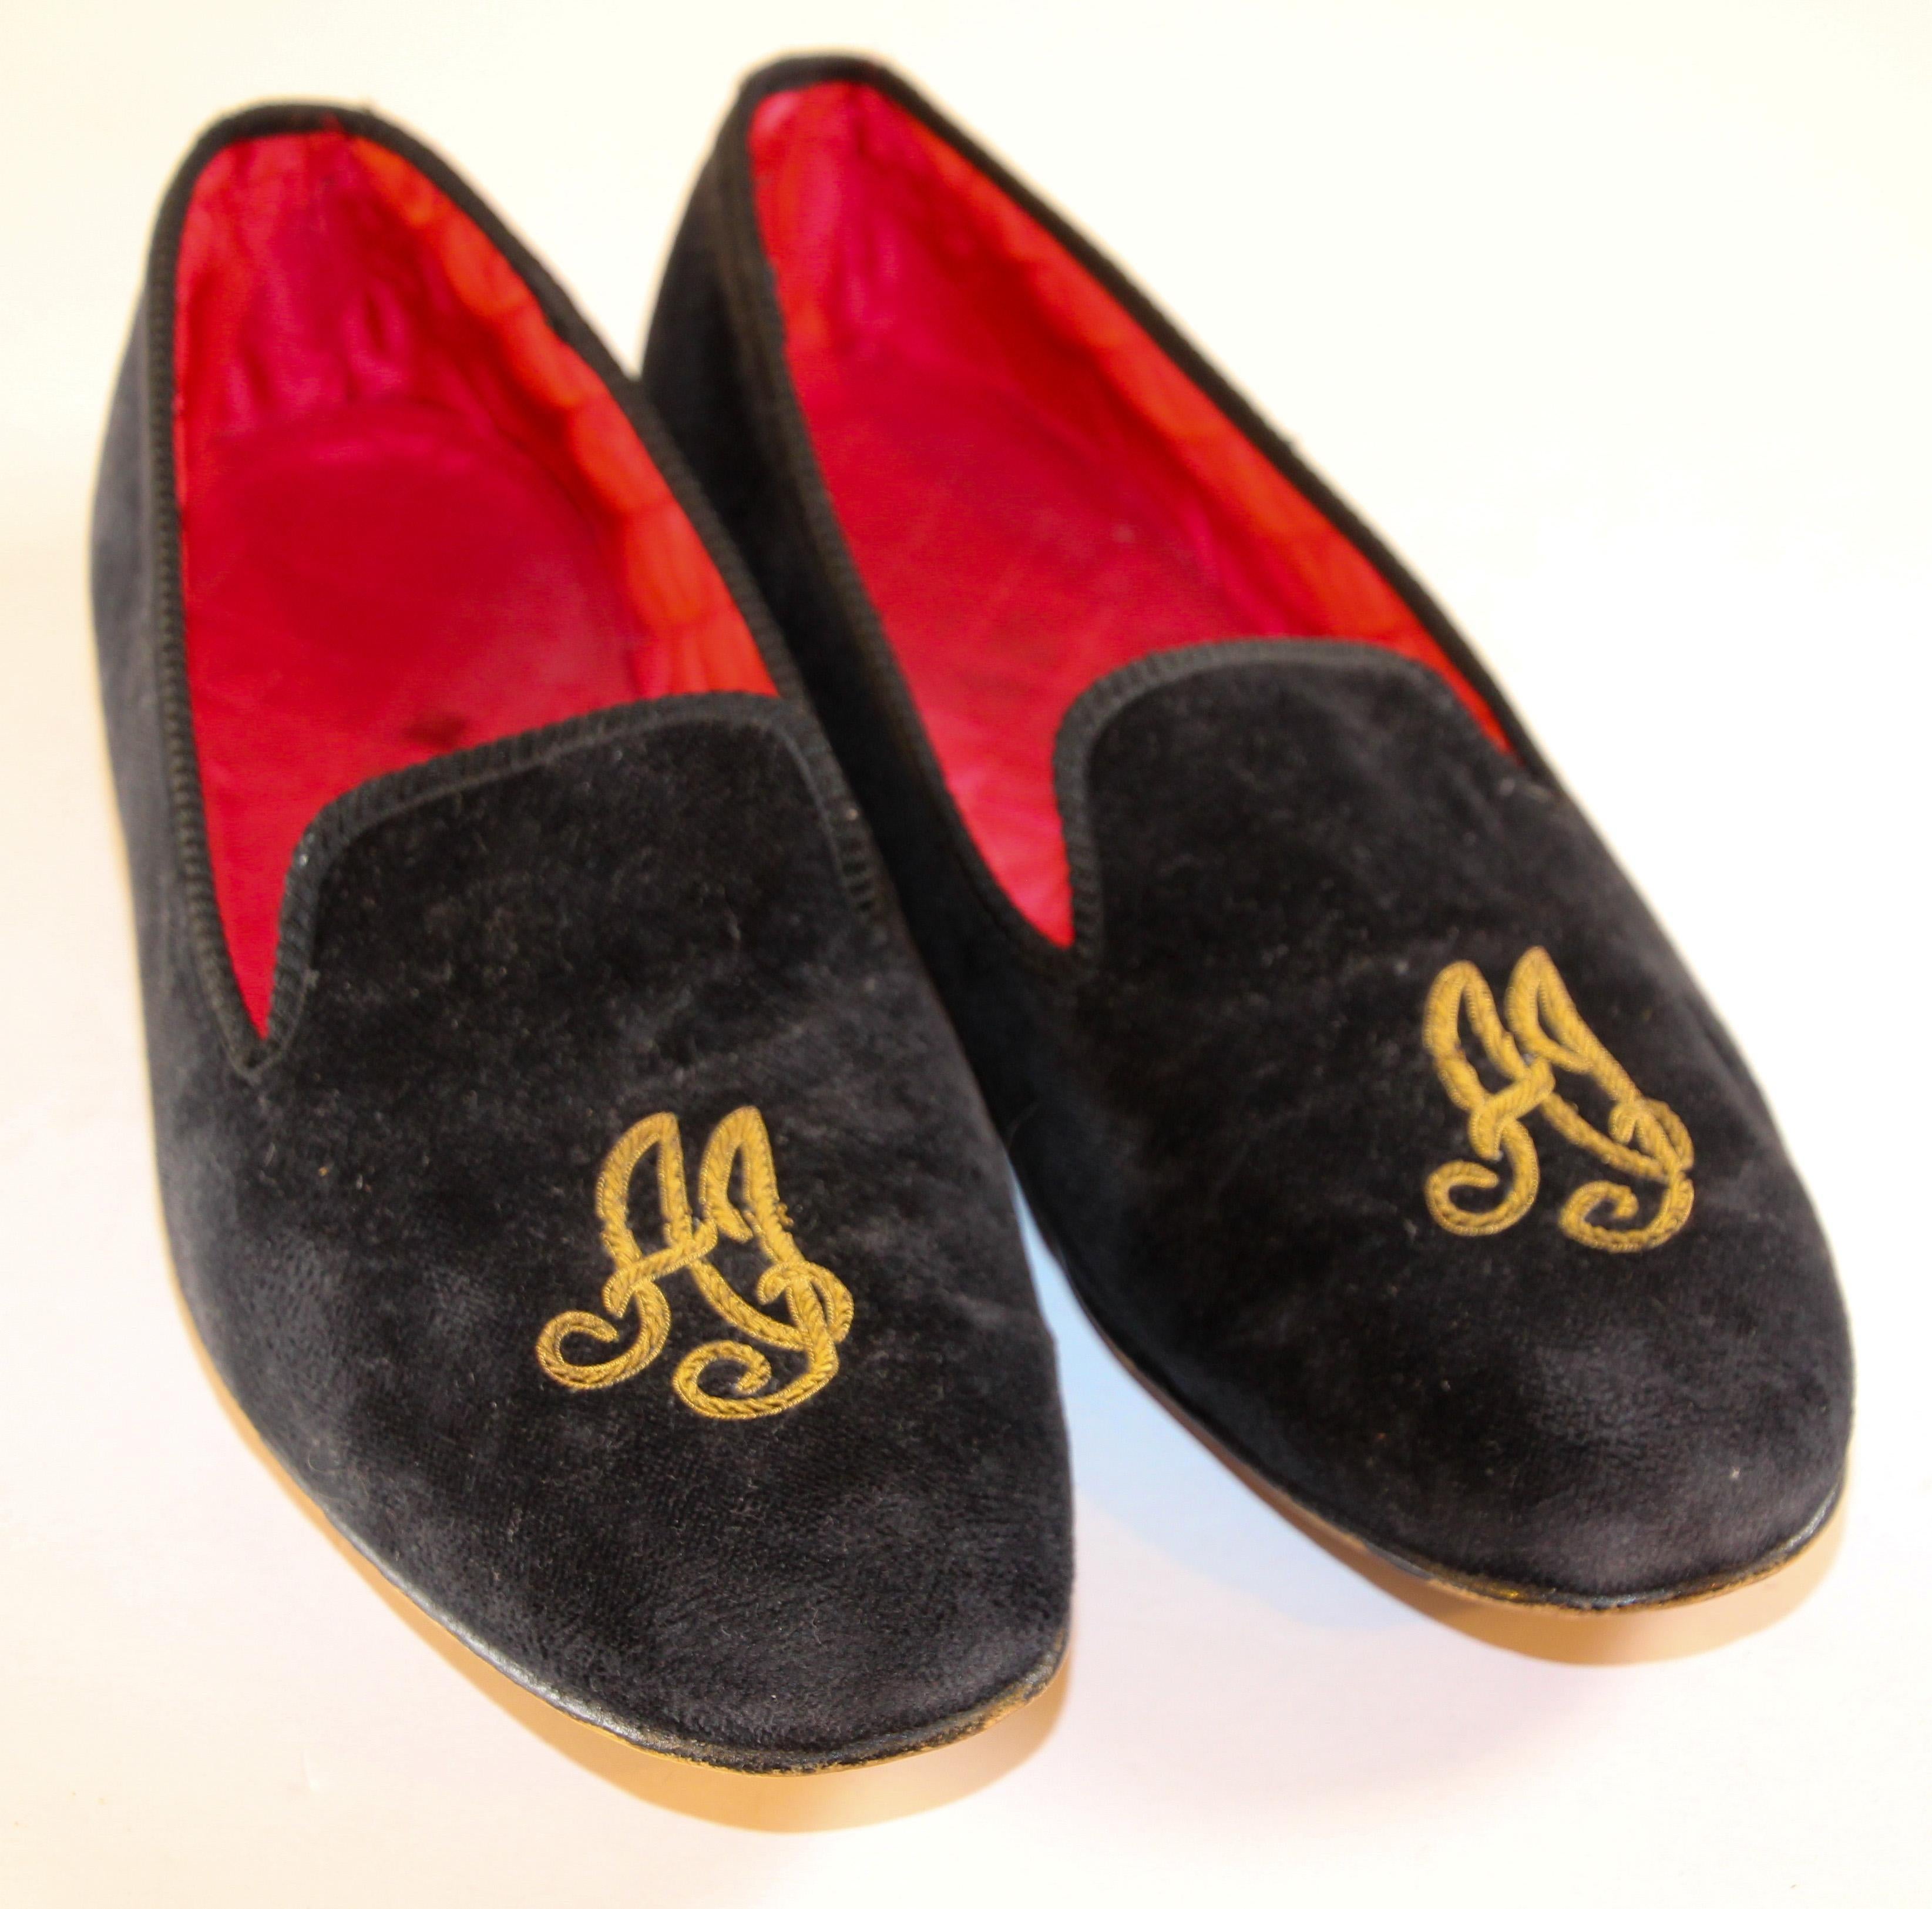 Men luxury hand-made, leather-soled velvet loafers, aristocratically hand embroidered with gold bullion thread.
Comfort, pedigree and luxury in a slip on.
Monogrammed slipon shoes for Men.
Men's black velvet and gold loafers.
Black velvet outers are